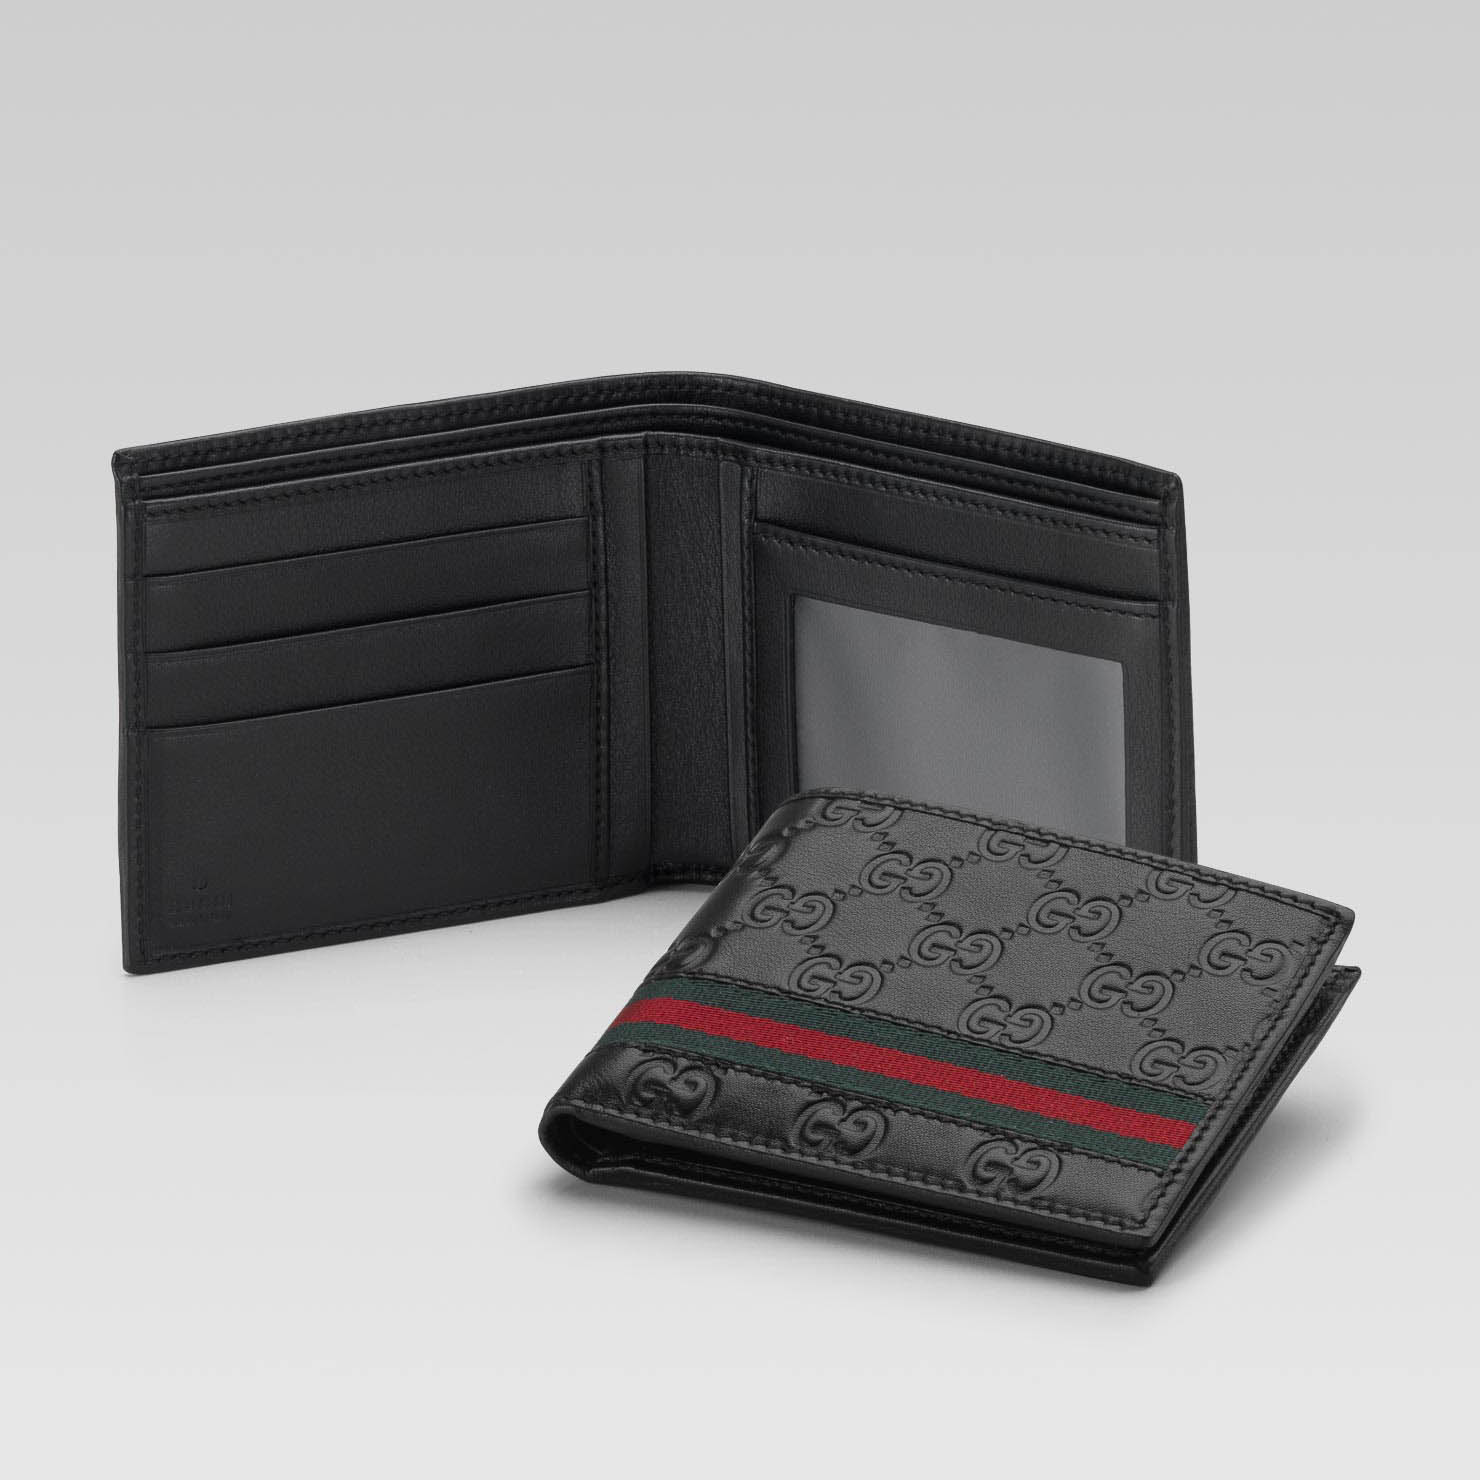 Fashion :: Bags & Wallets :: Wallets :: Gucci Wallet Chocolate Red Green - www.bagssaleusa.com